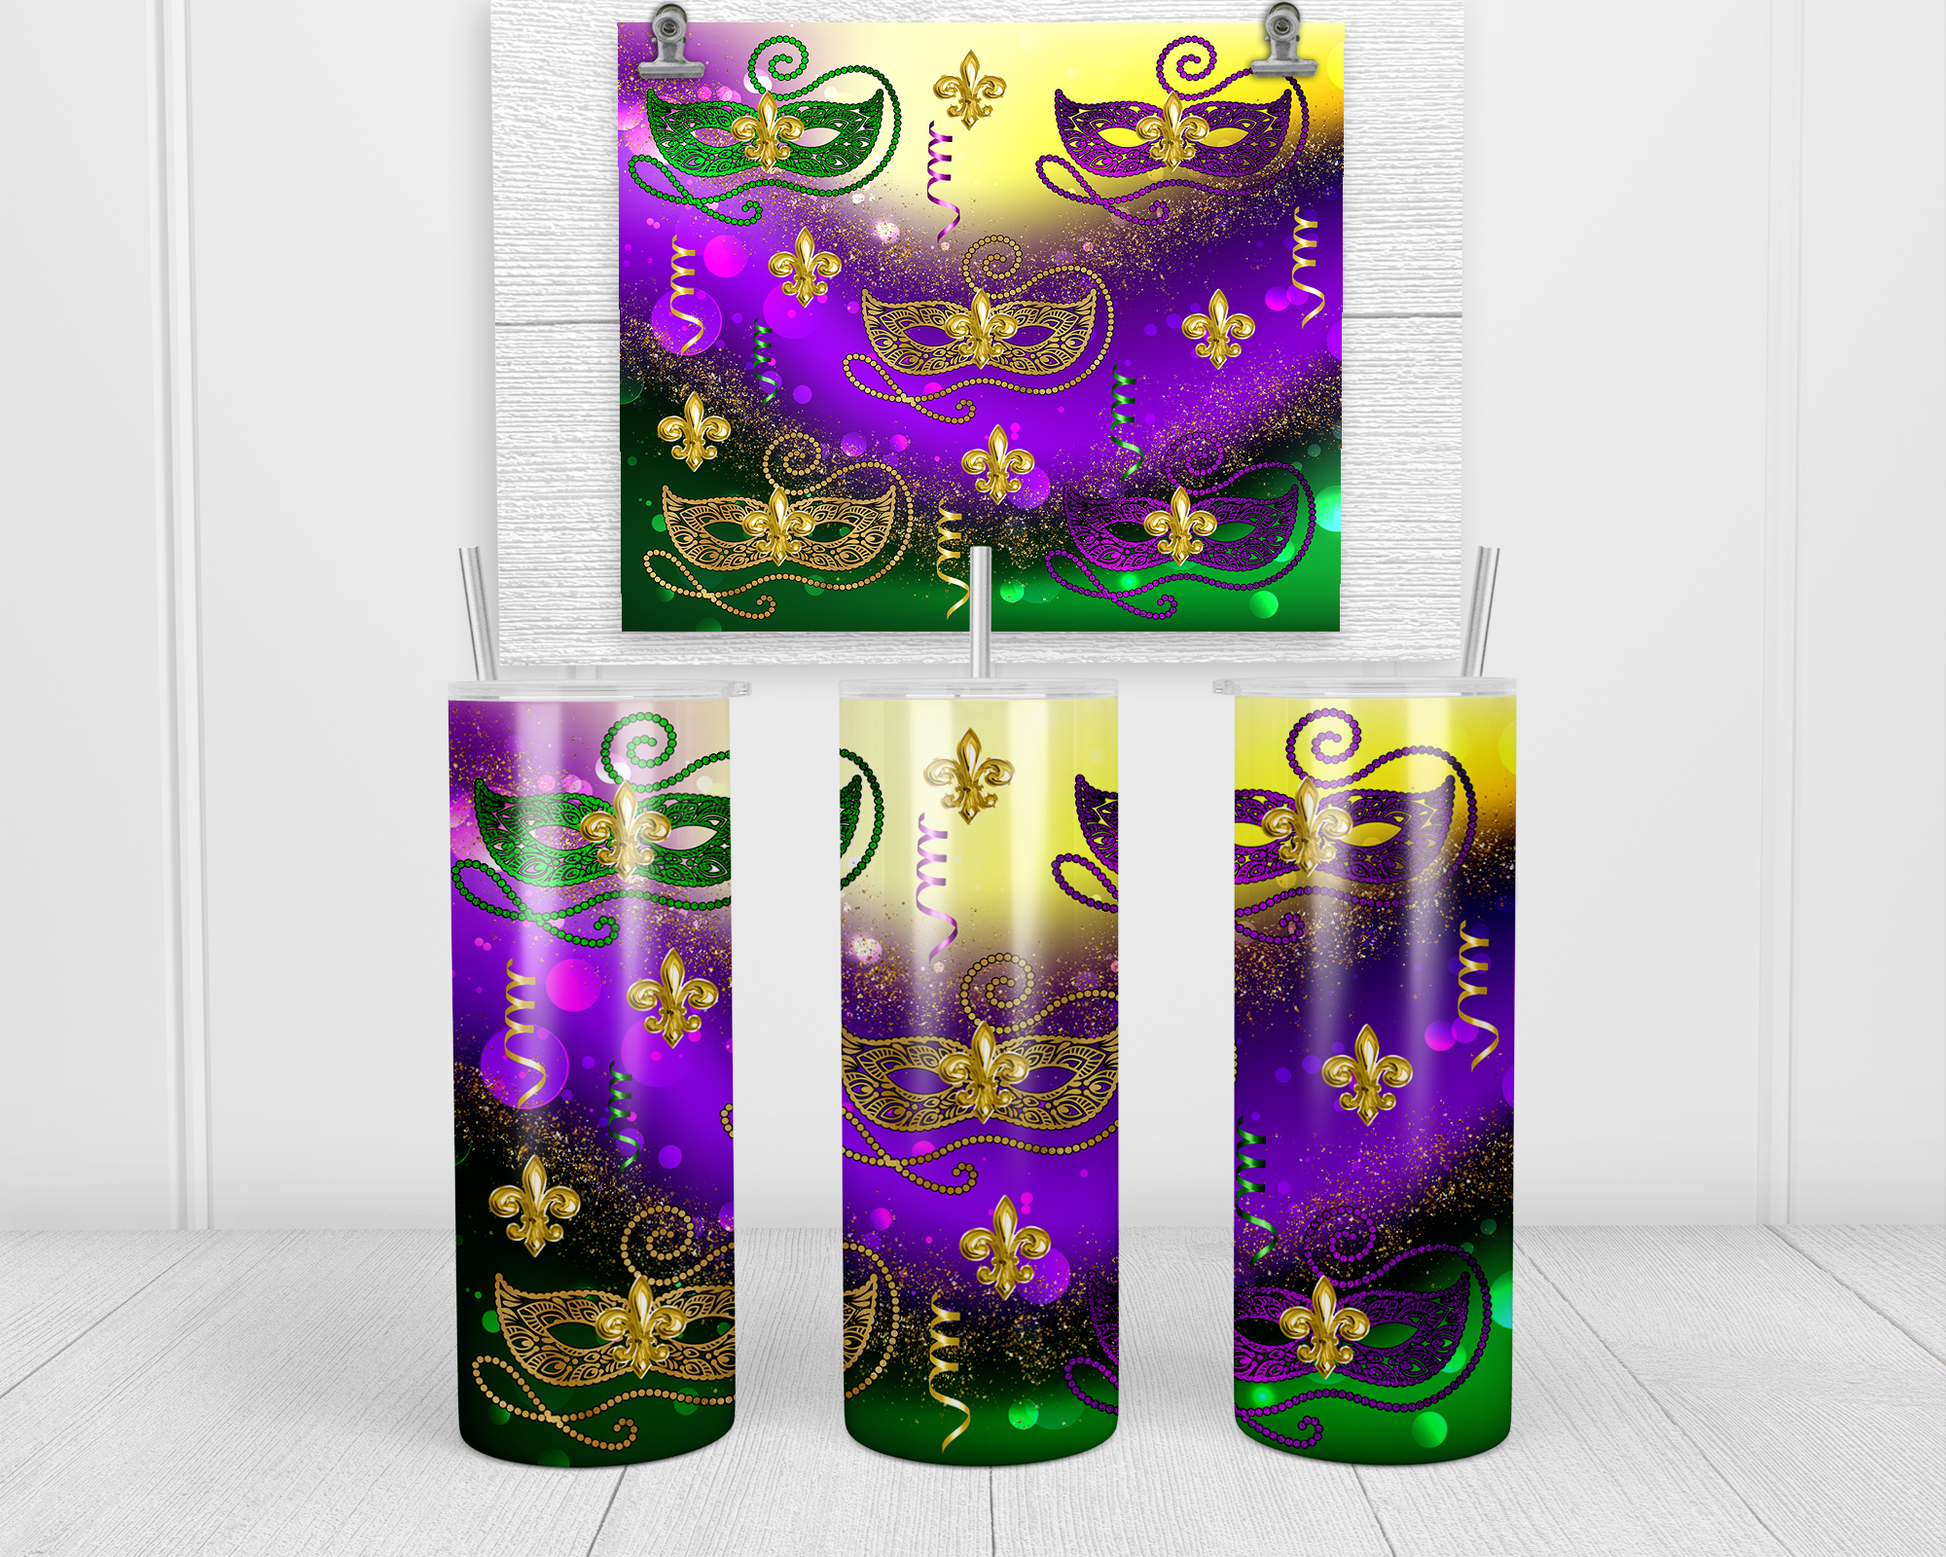 Celebrate Mardi Gras in style with this 20 oz tumbler, surrounded by vibrant Mardi Gras masks. Perfect for keeping your beverages hot or cold, it embodies the festive and colorful spirit of the carnival season